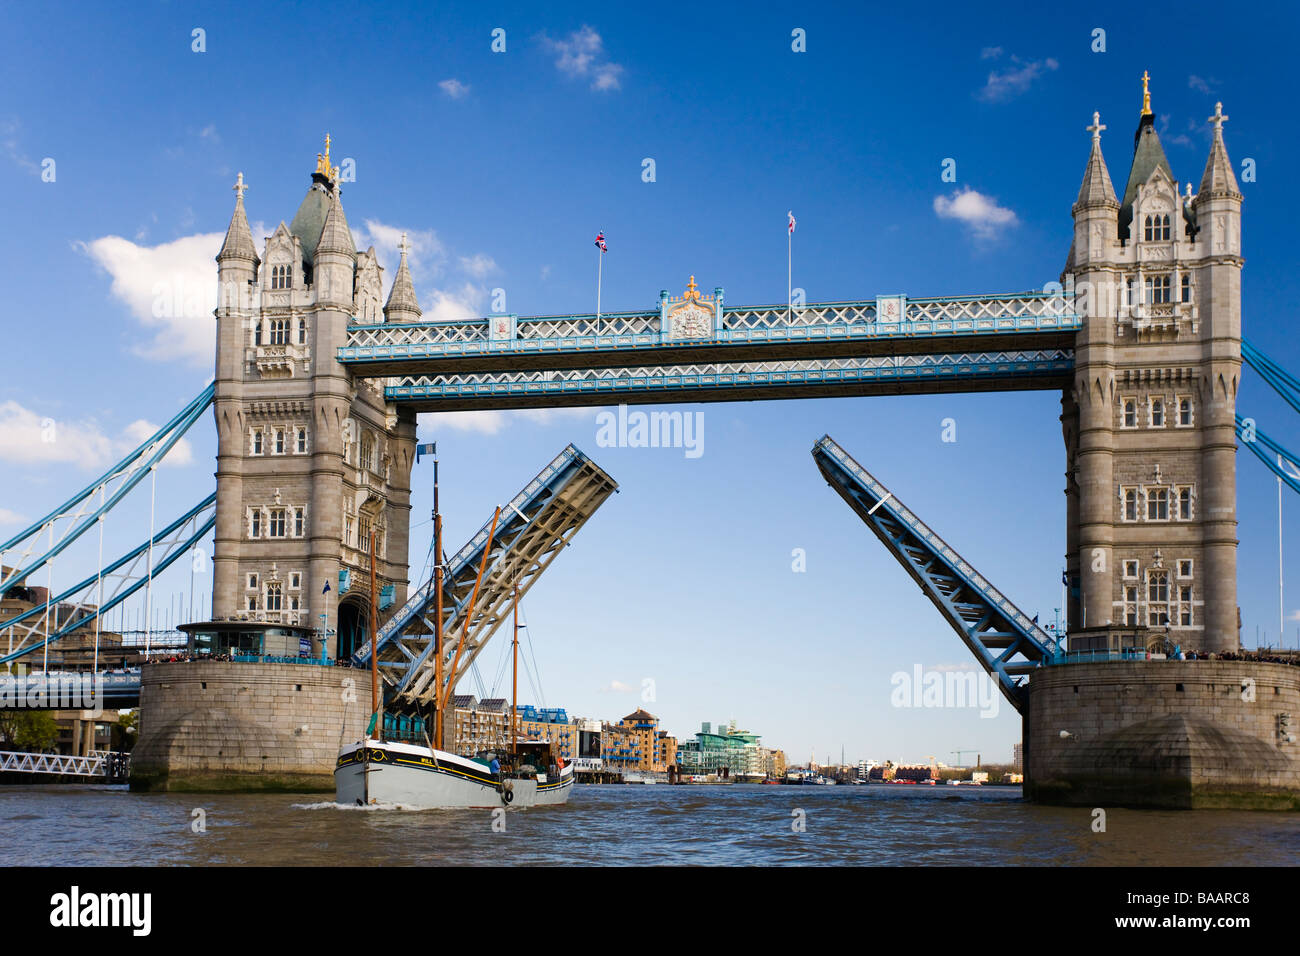 London England UK Tower Bridge Open With A Thames barge passing through Stock Photo